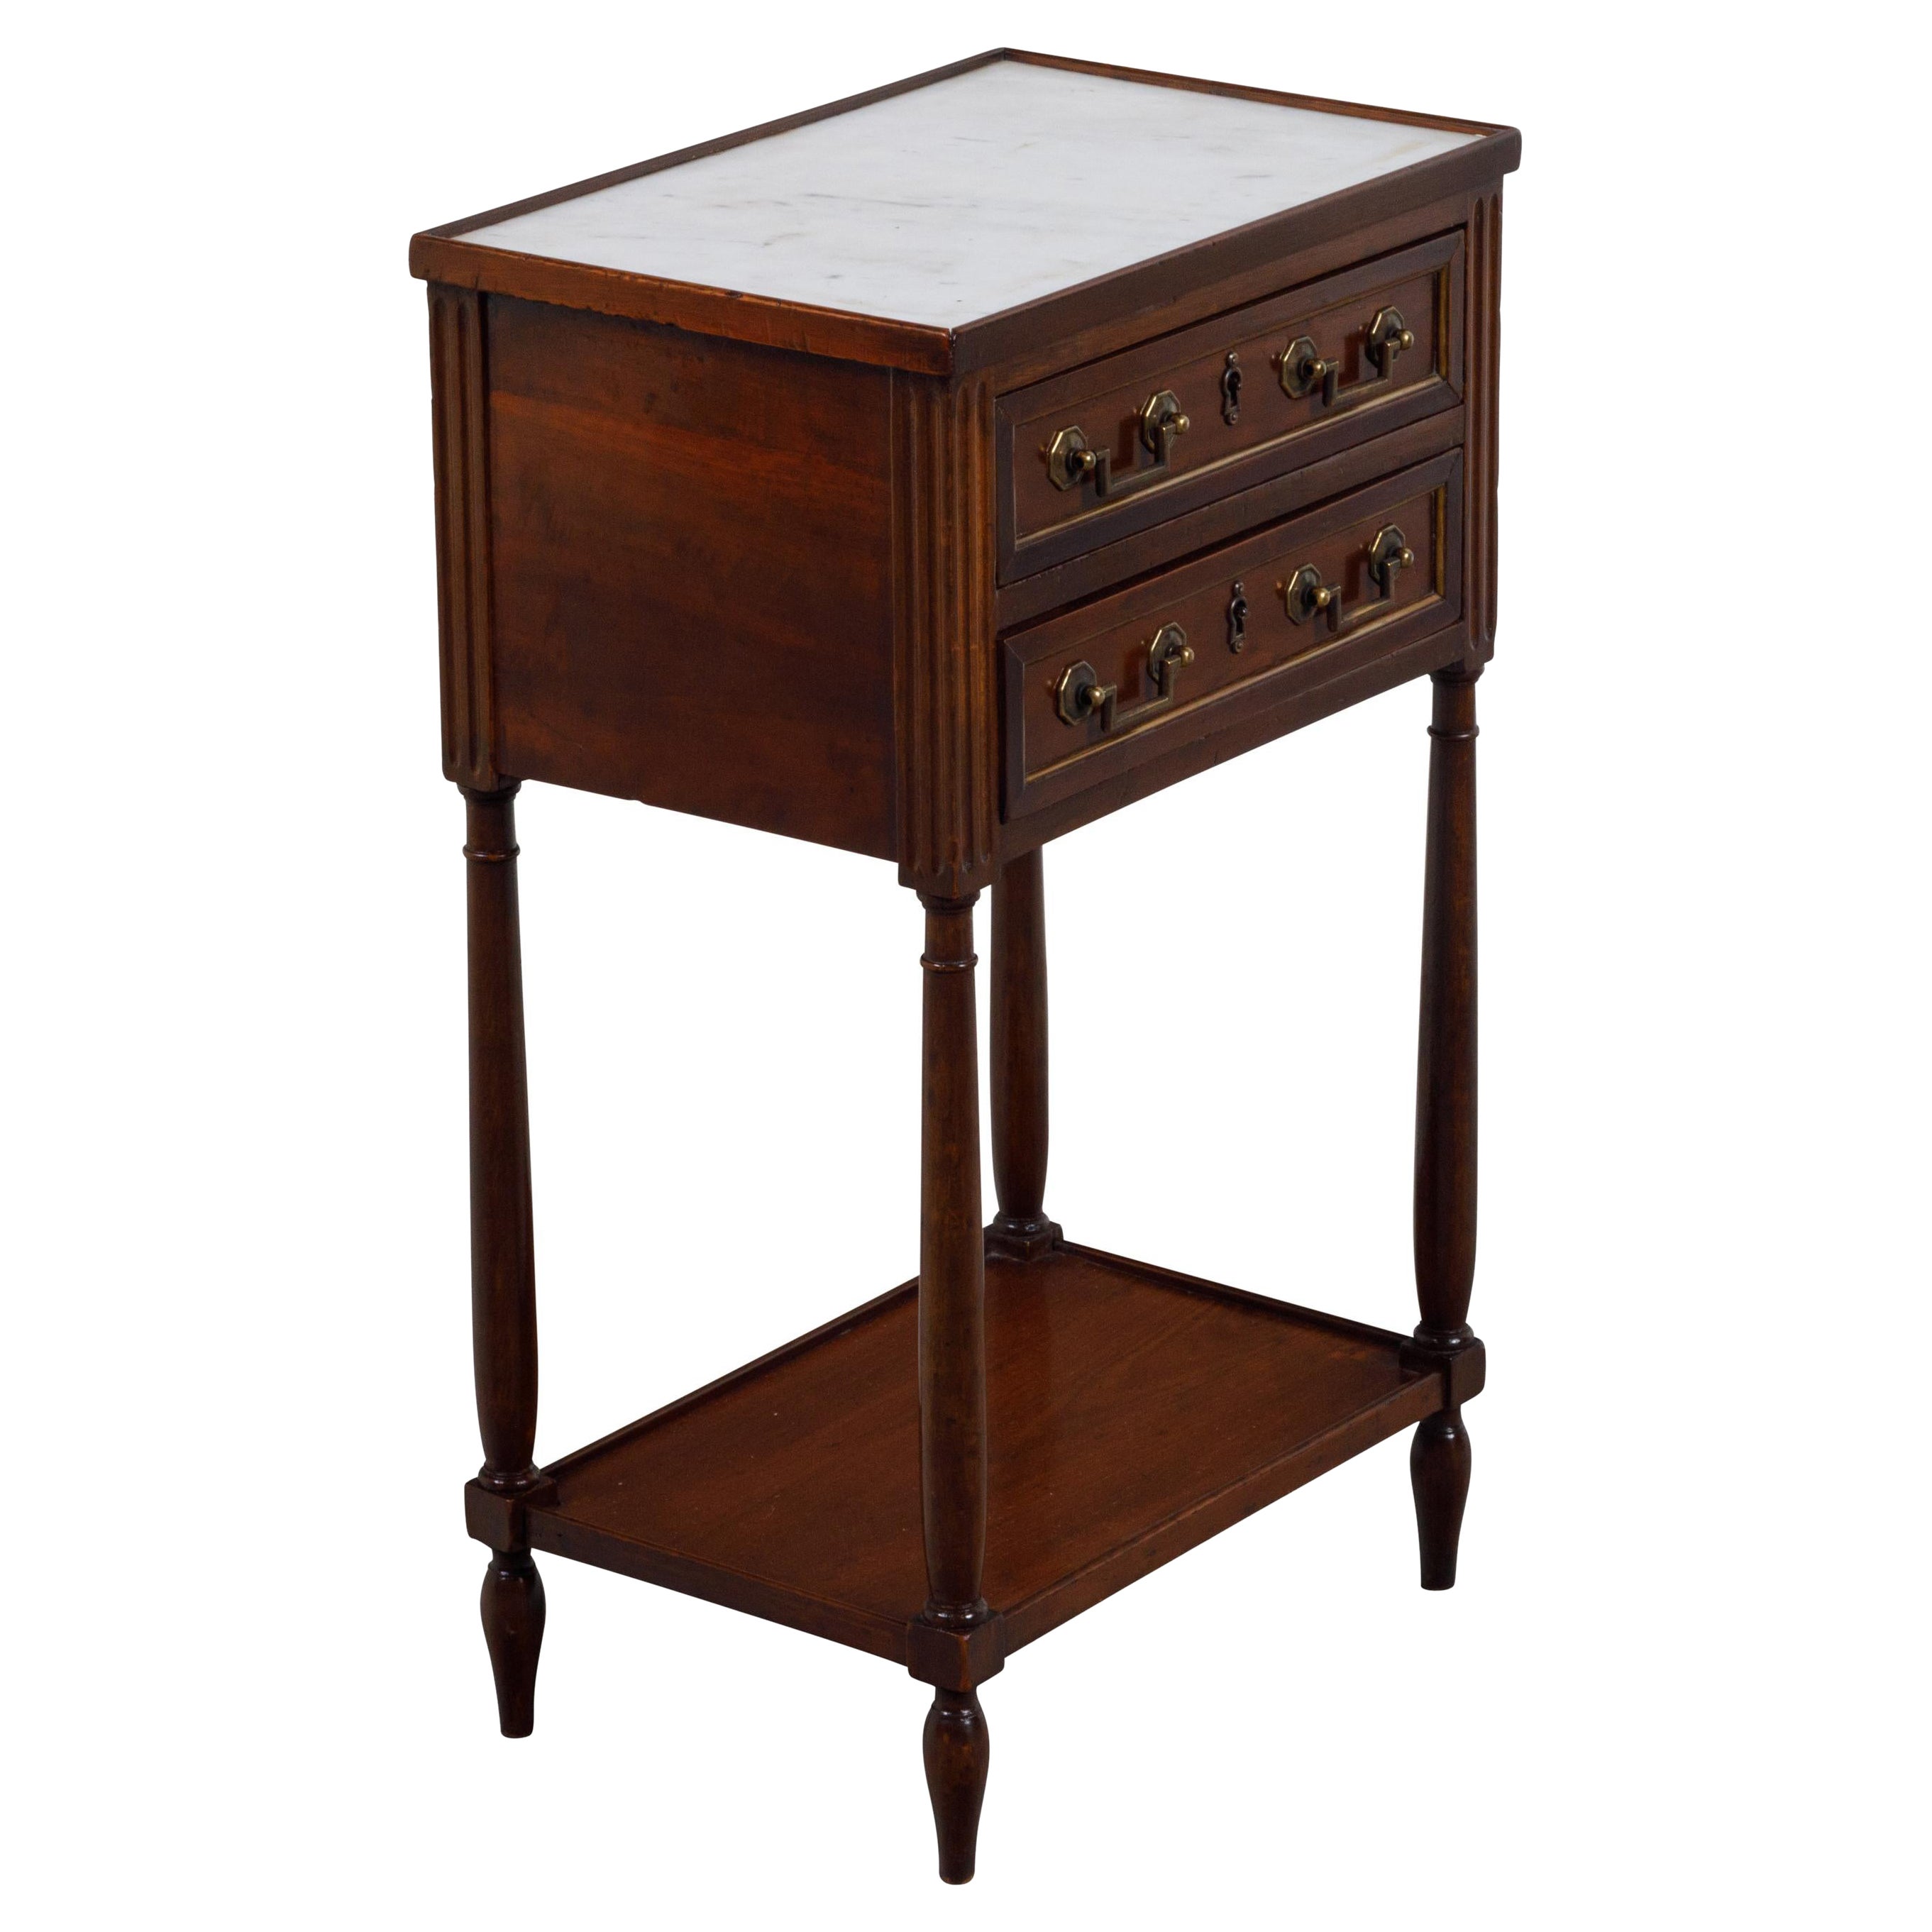 English Regency Period 1820s Mahogany Table with White Marble Top and Drawers